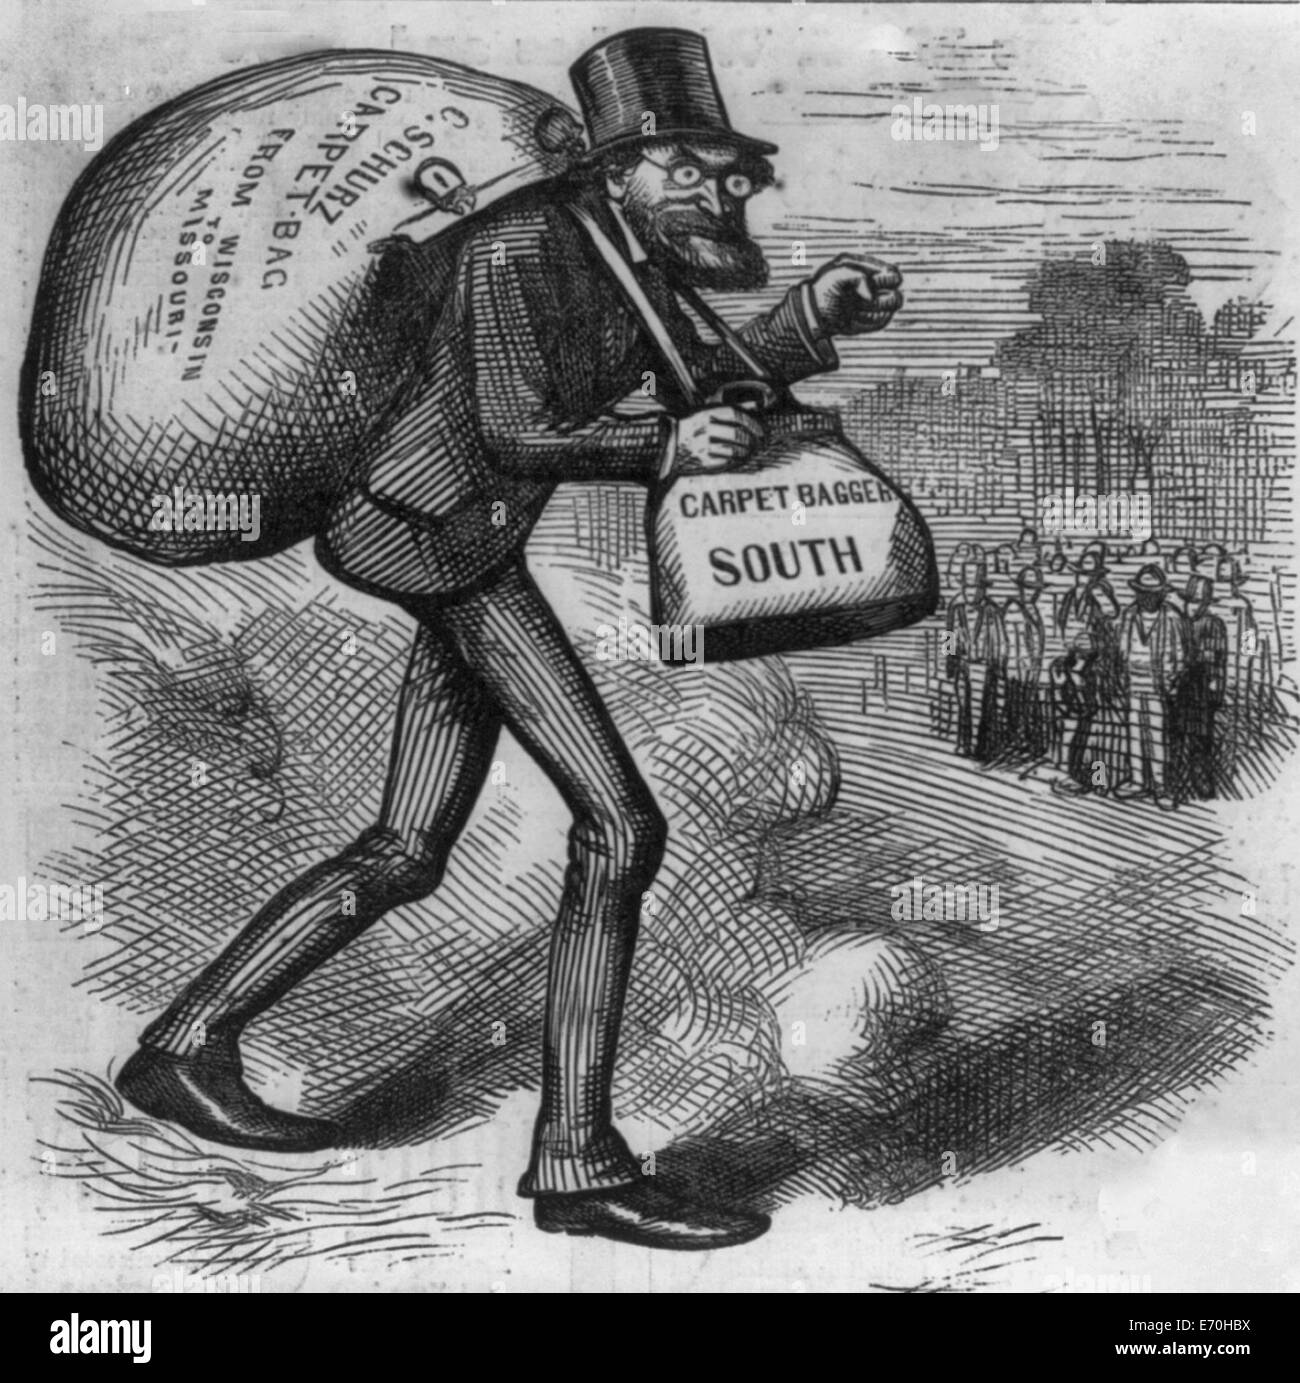 The man with the carpet bags - Caricature of Carl Schurz carrying bags labeled, 'carpet bag' and 'carpet bagger South.' USA Reconstruction, 1872 Stock Photo